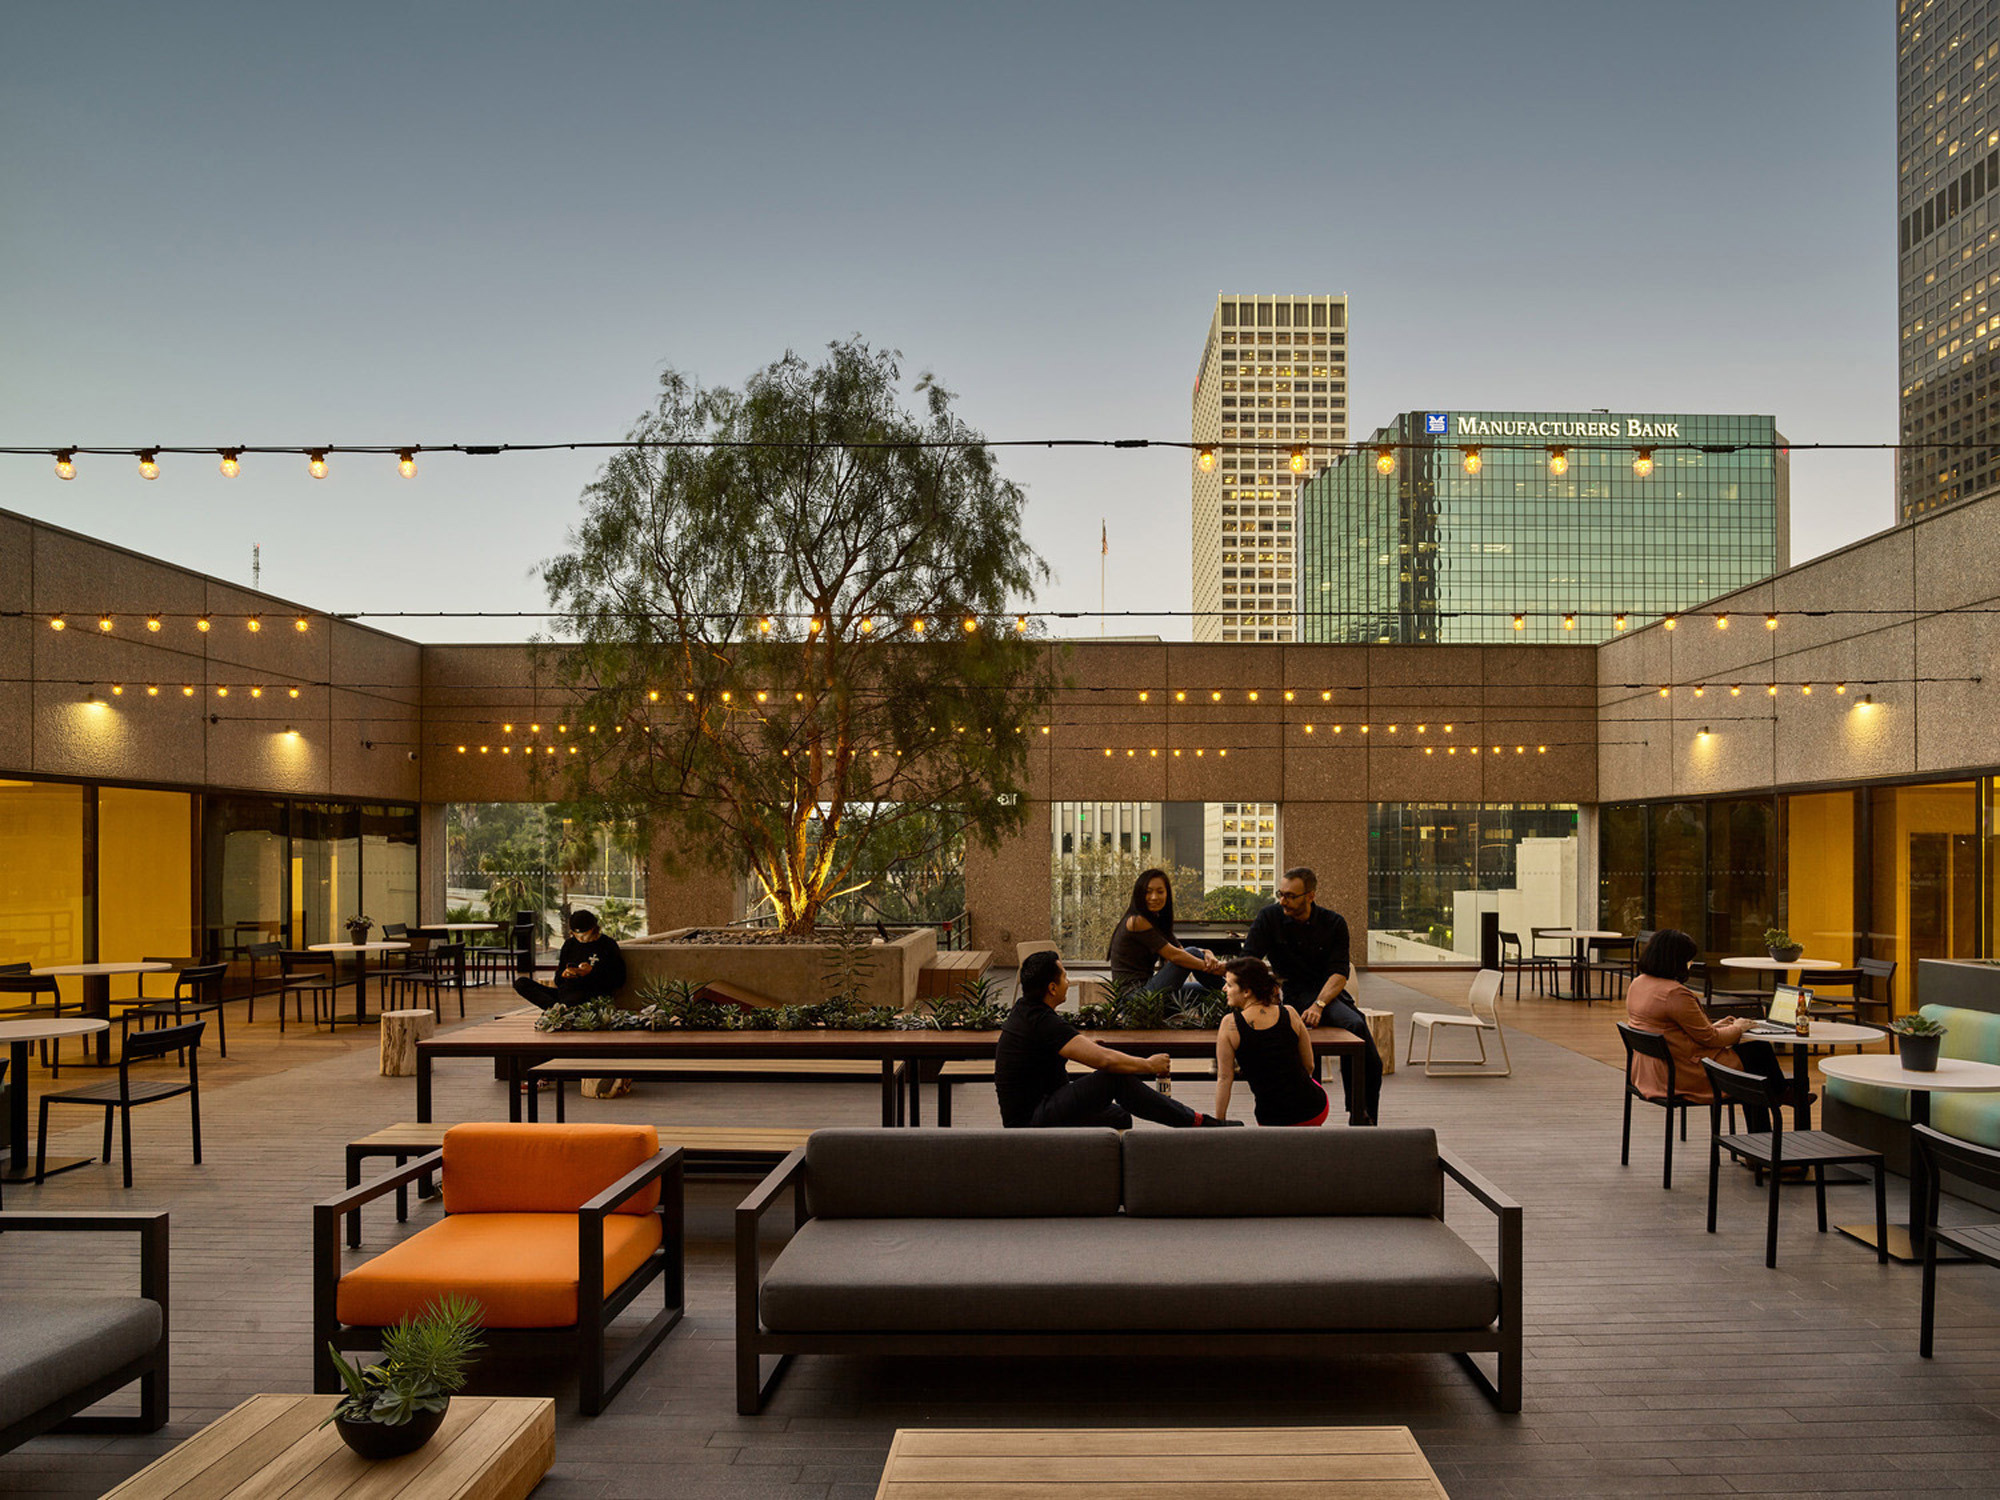 Rooftop terrace with modern outdoor furniture, string lights overhead, and cityscape backdrop during twilight. The area features a mix of communal tables, lounge seating, and landscaping, promoting social interaction in an urban setting.